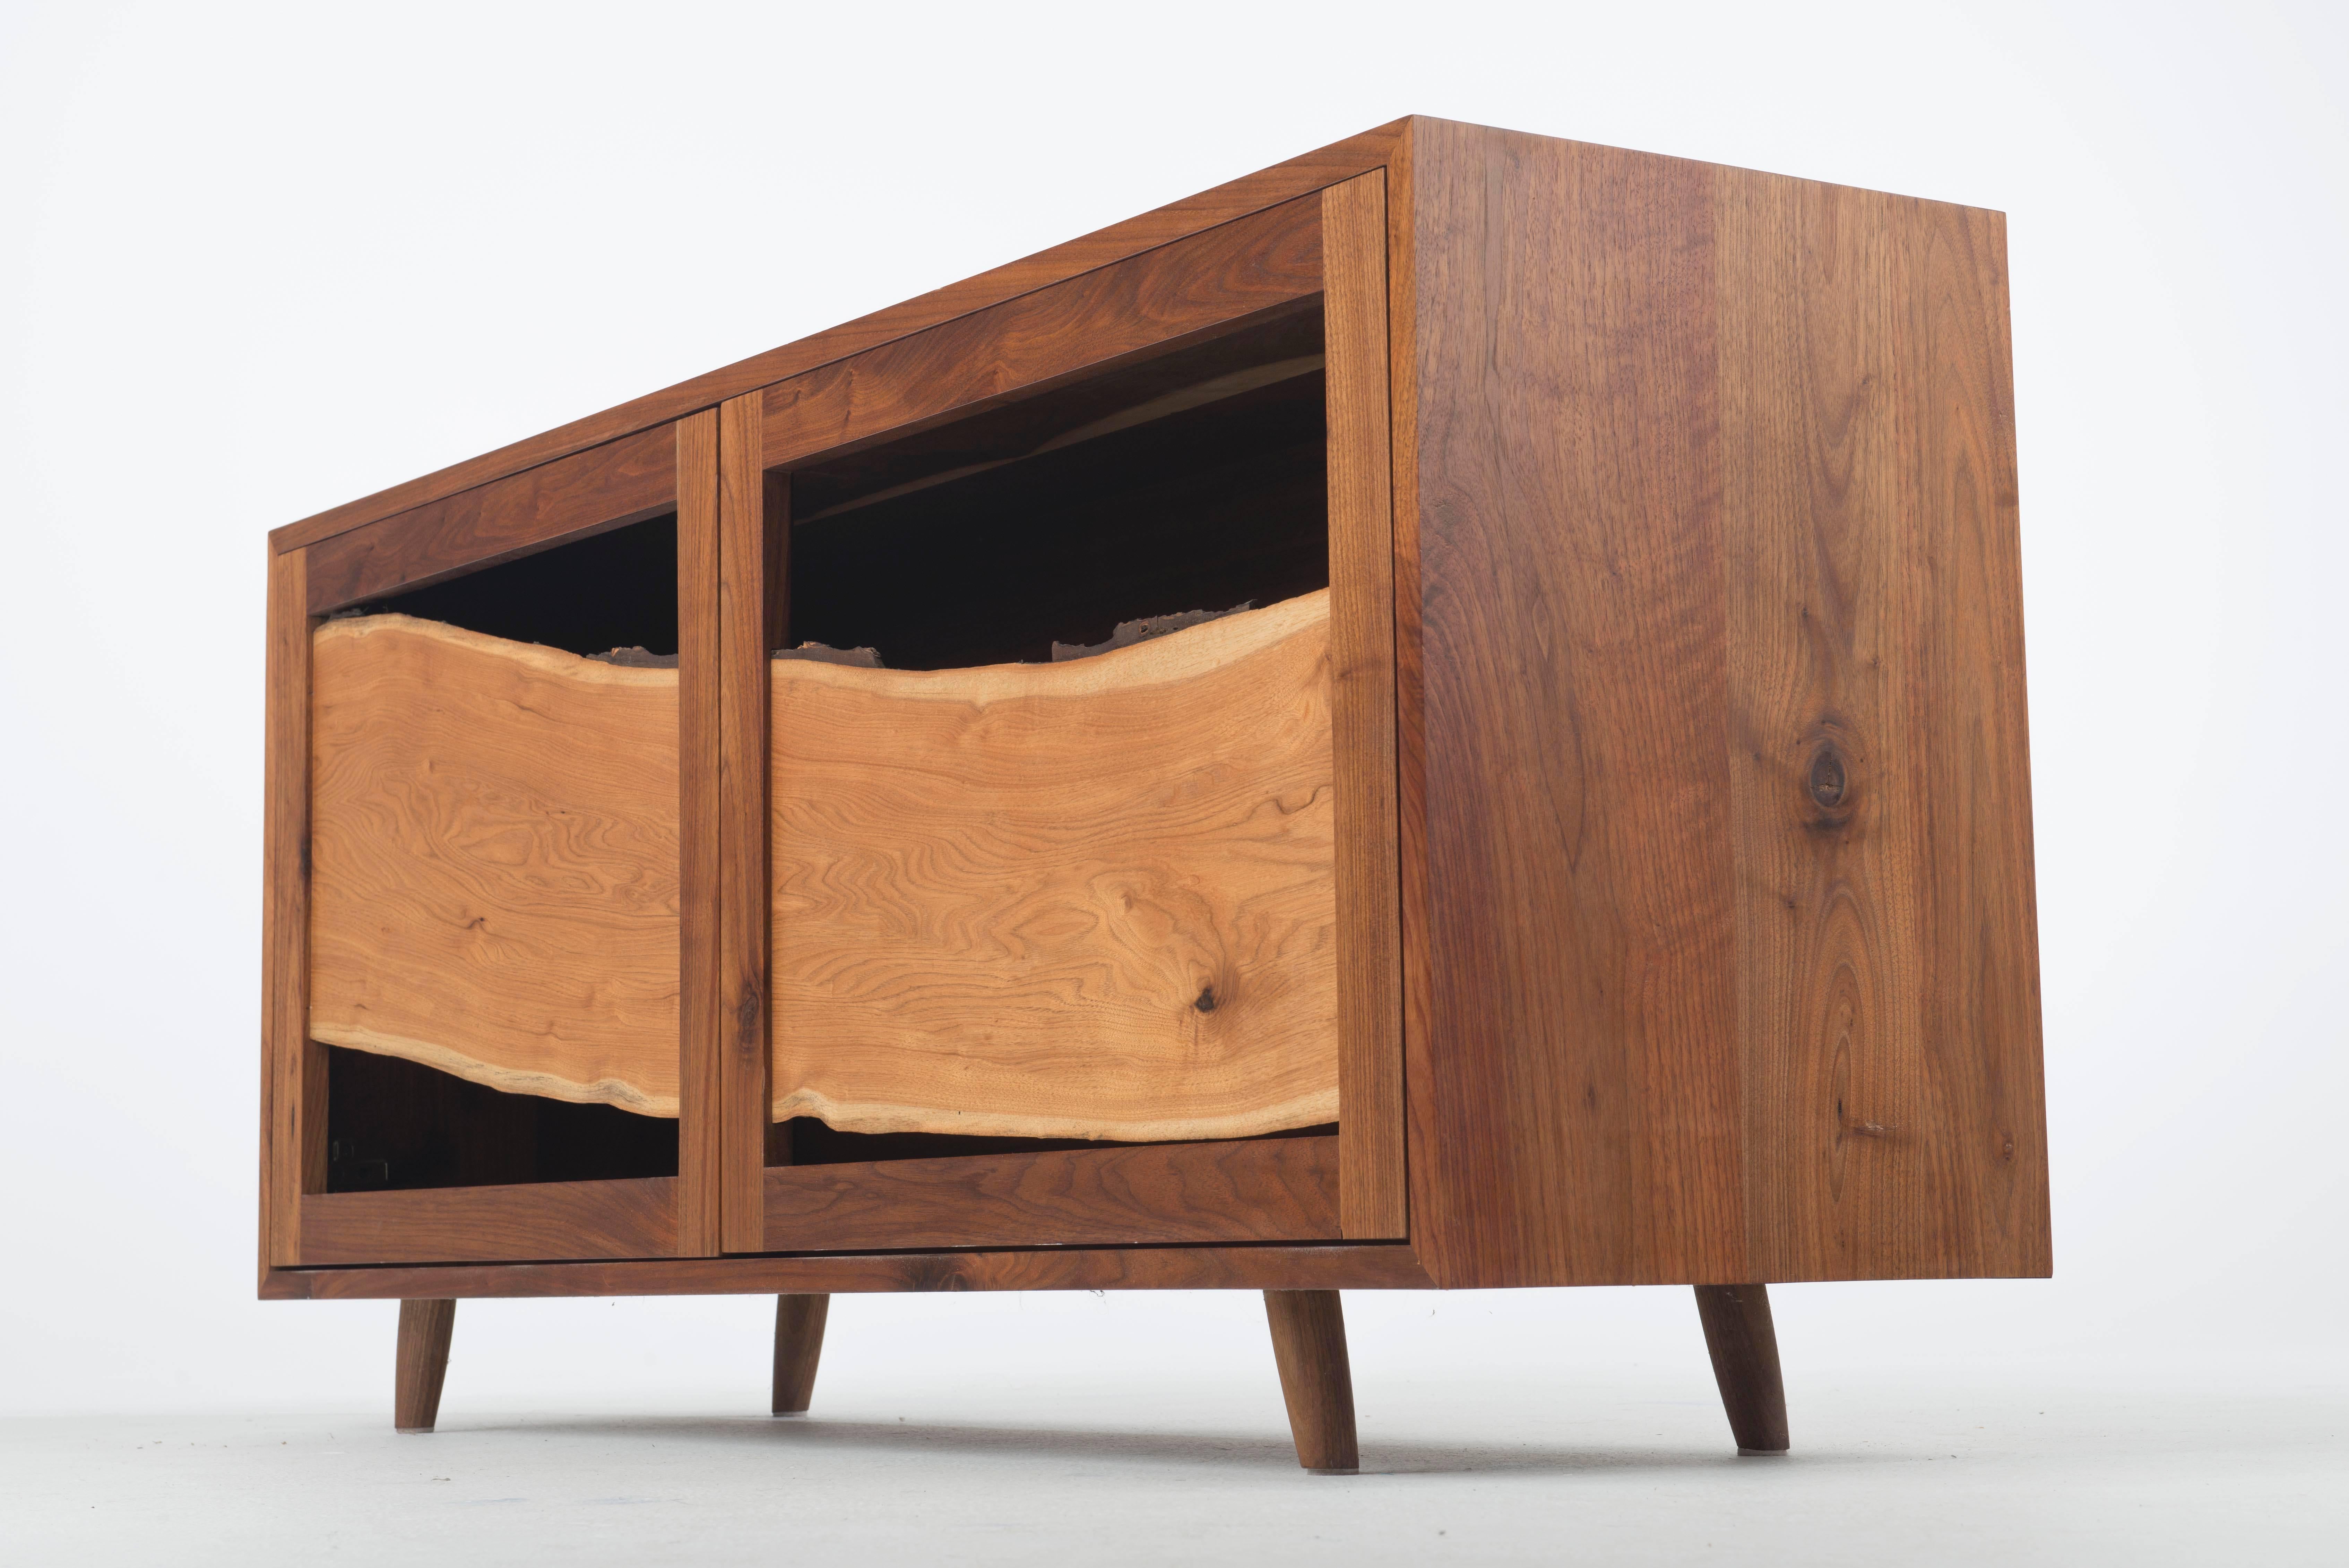 Juxtaposition. Curve with angles. Dark with light. Mass with void. Strength in design lies in the ability to create opposition and tension without becoming incongruous. The central panel in this sustainably made cabinet is a single sweeping board of